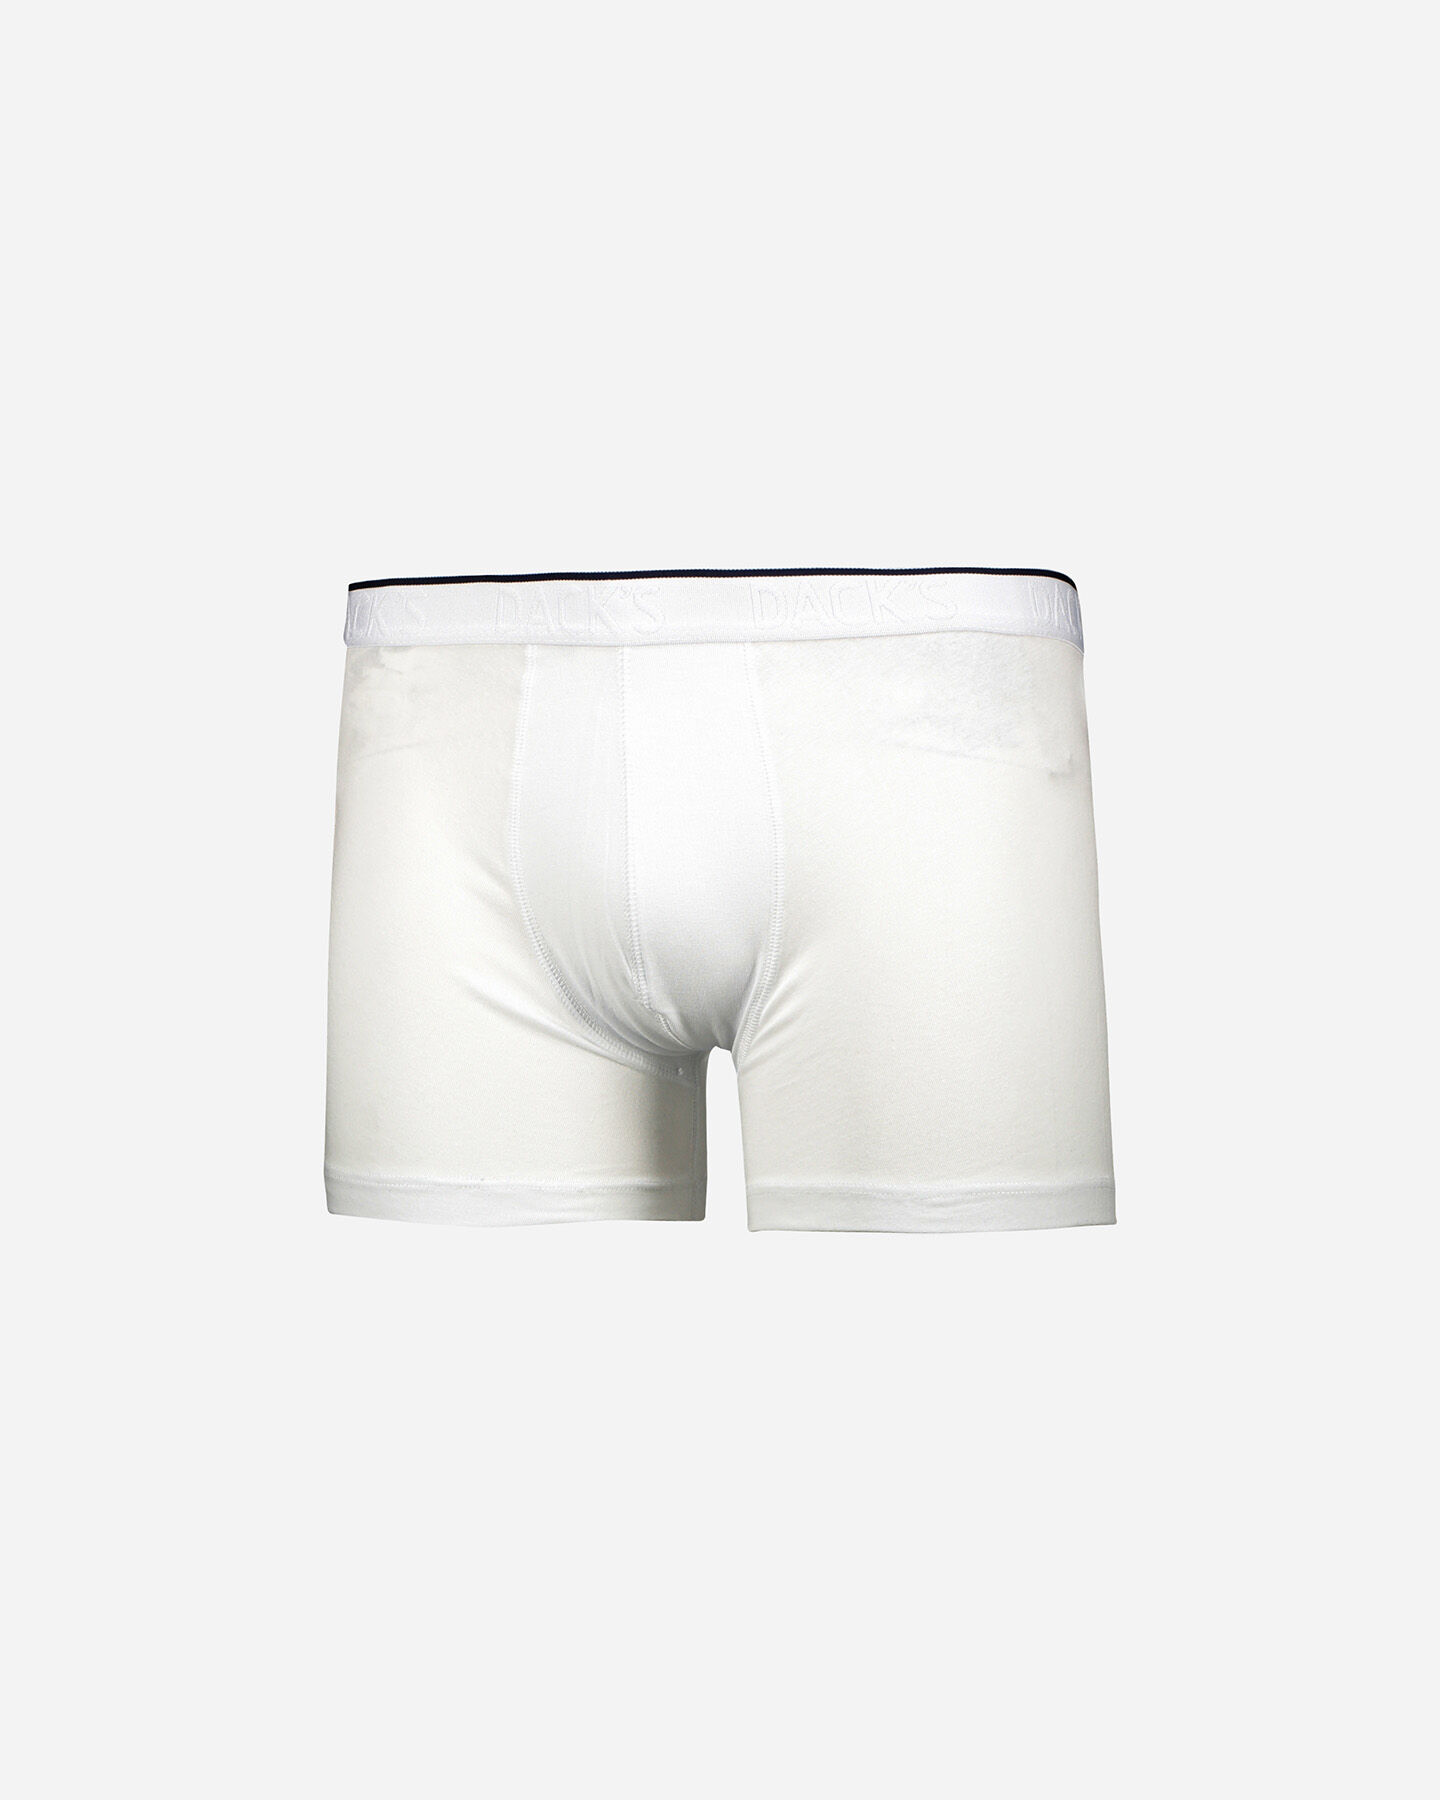  Intimo DACK'S BIPACK BASIC BOXER M S4061962|050/001|XL scatto 1